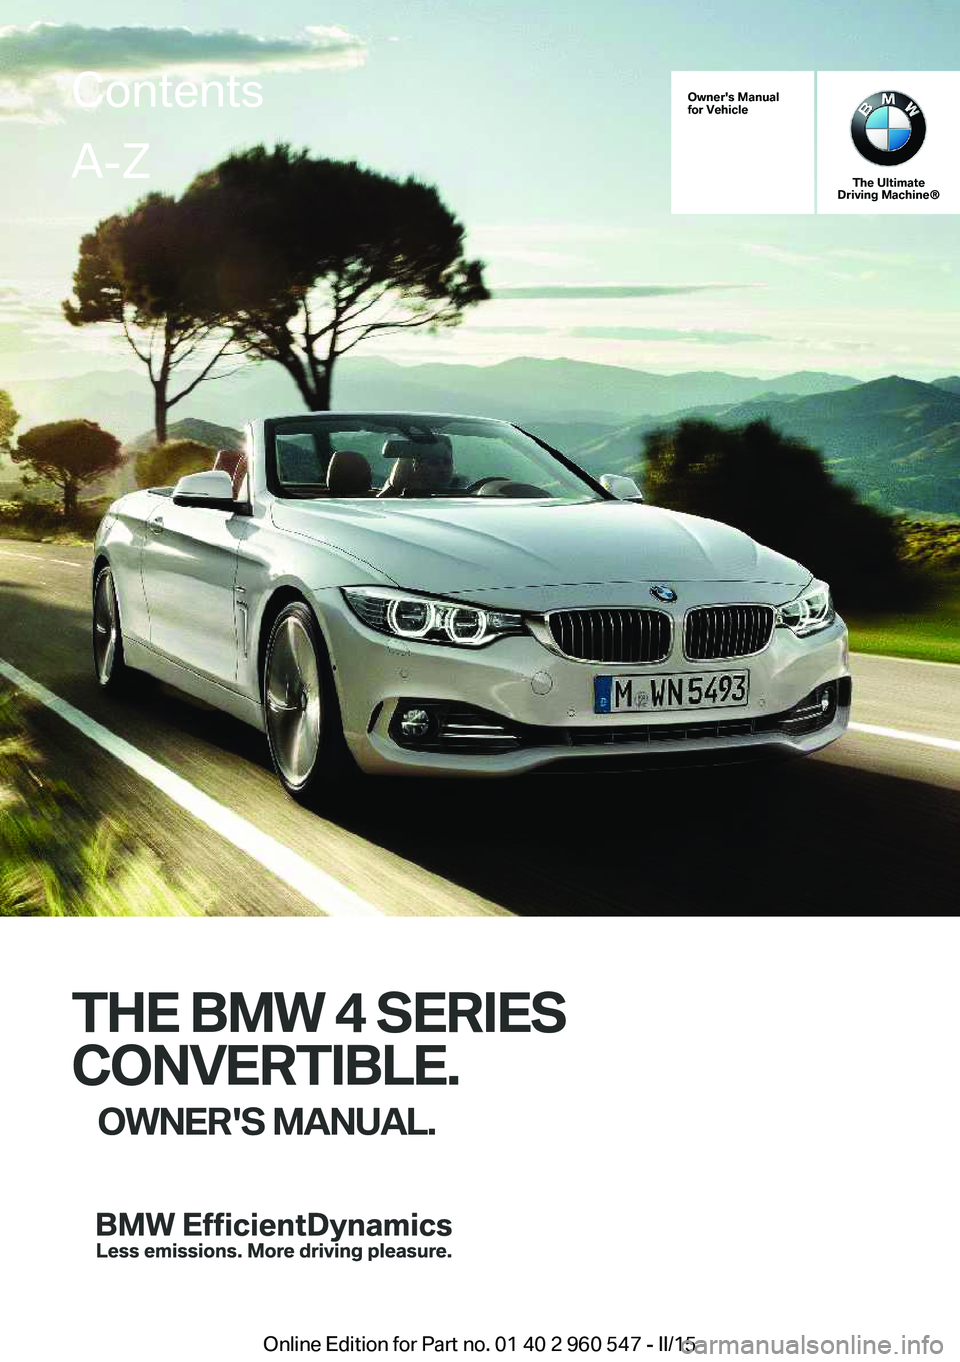 BMW 428I CONVERTIBLE 2015  Owners Manual Owner's Manual
for Vehicle
The Ultimate
Driving Machine®
THE BMW 4 SERIES
CONVERTIBLE. OWNER'S MANUAL.
ContentsA-Z
Online Edition for Part no. 01 40 2 960 547 - II/15   